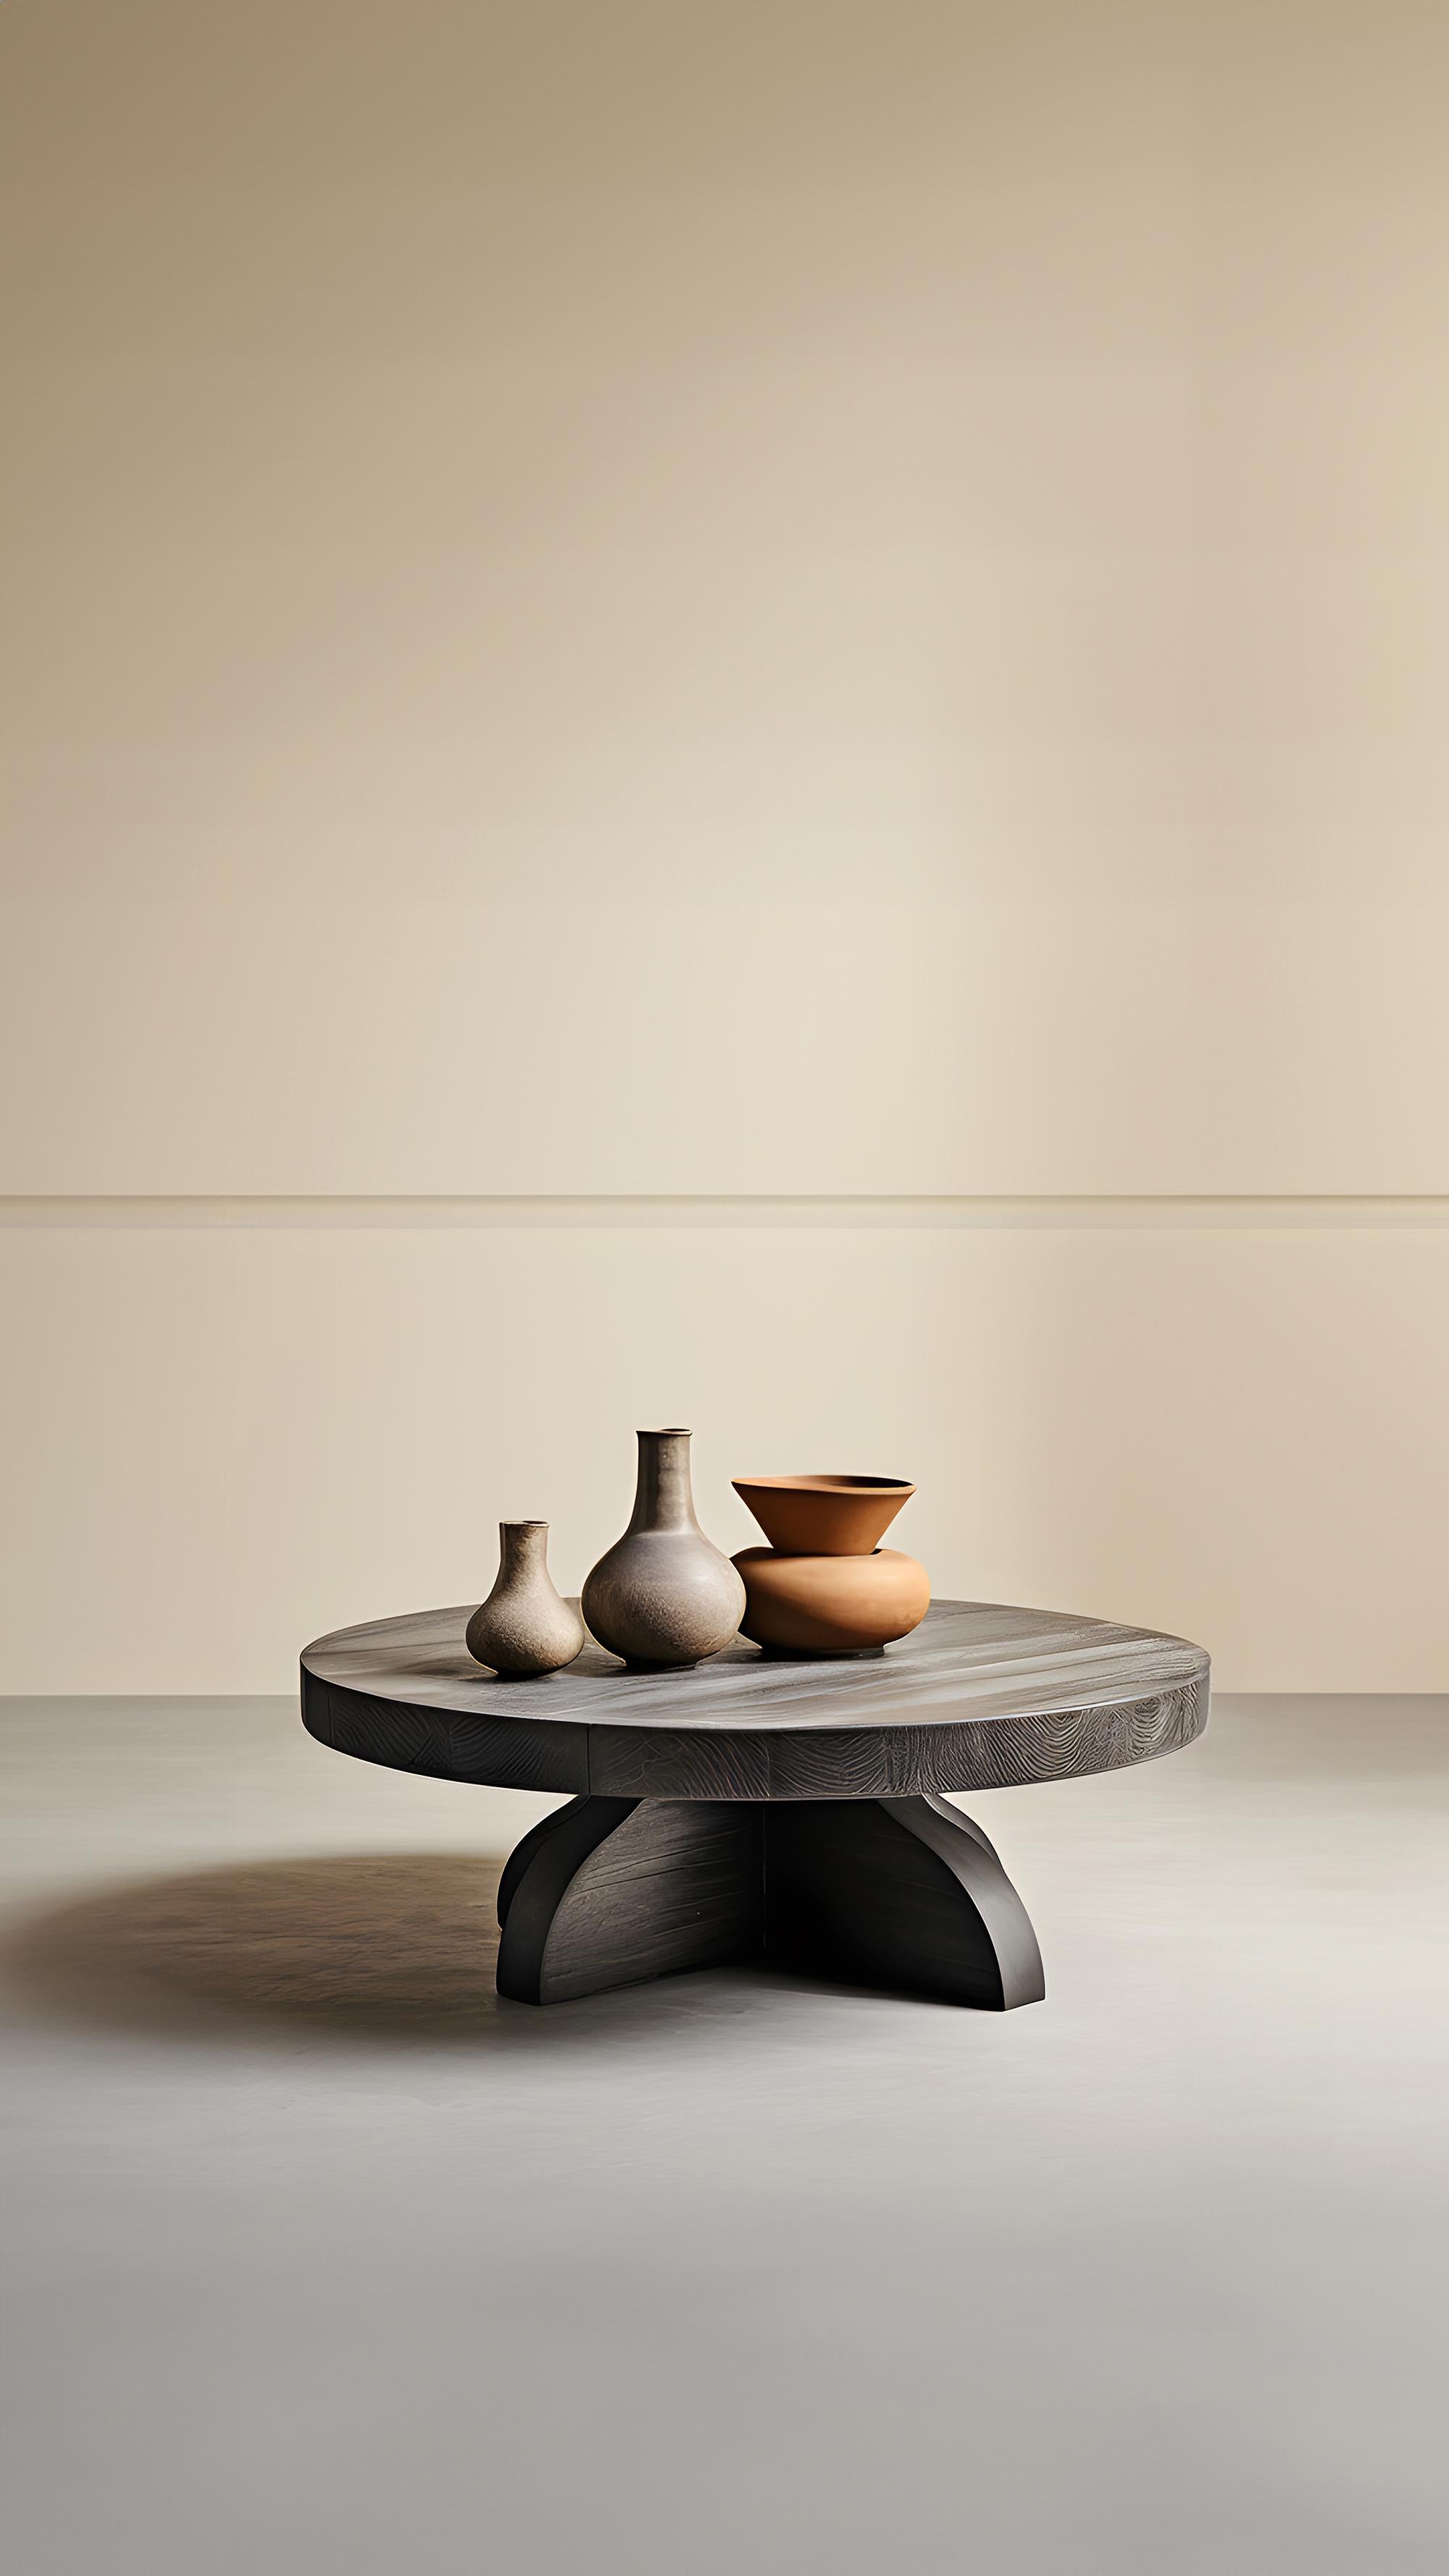 Black Fundamenta Abstract Table 57 Contemporary Oak Design by NONO


Sculptural coffee table made of solid wood with a natural water-based or black tinted finish. Due to the nature of the production process, each piece may vary in grain, texture,